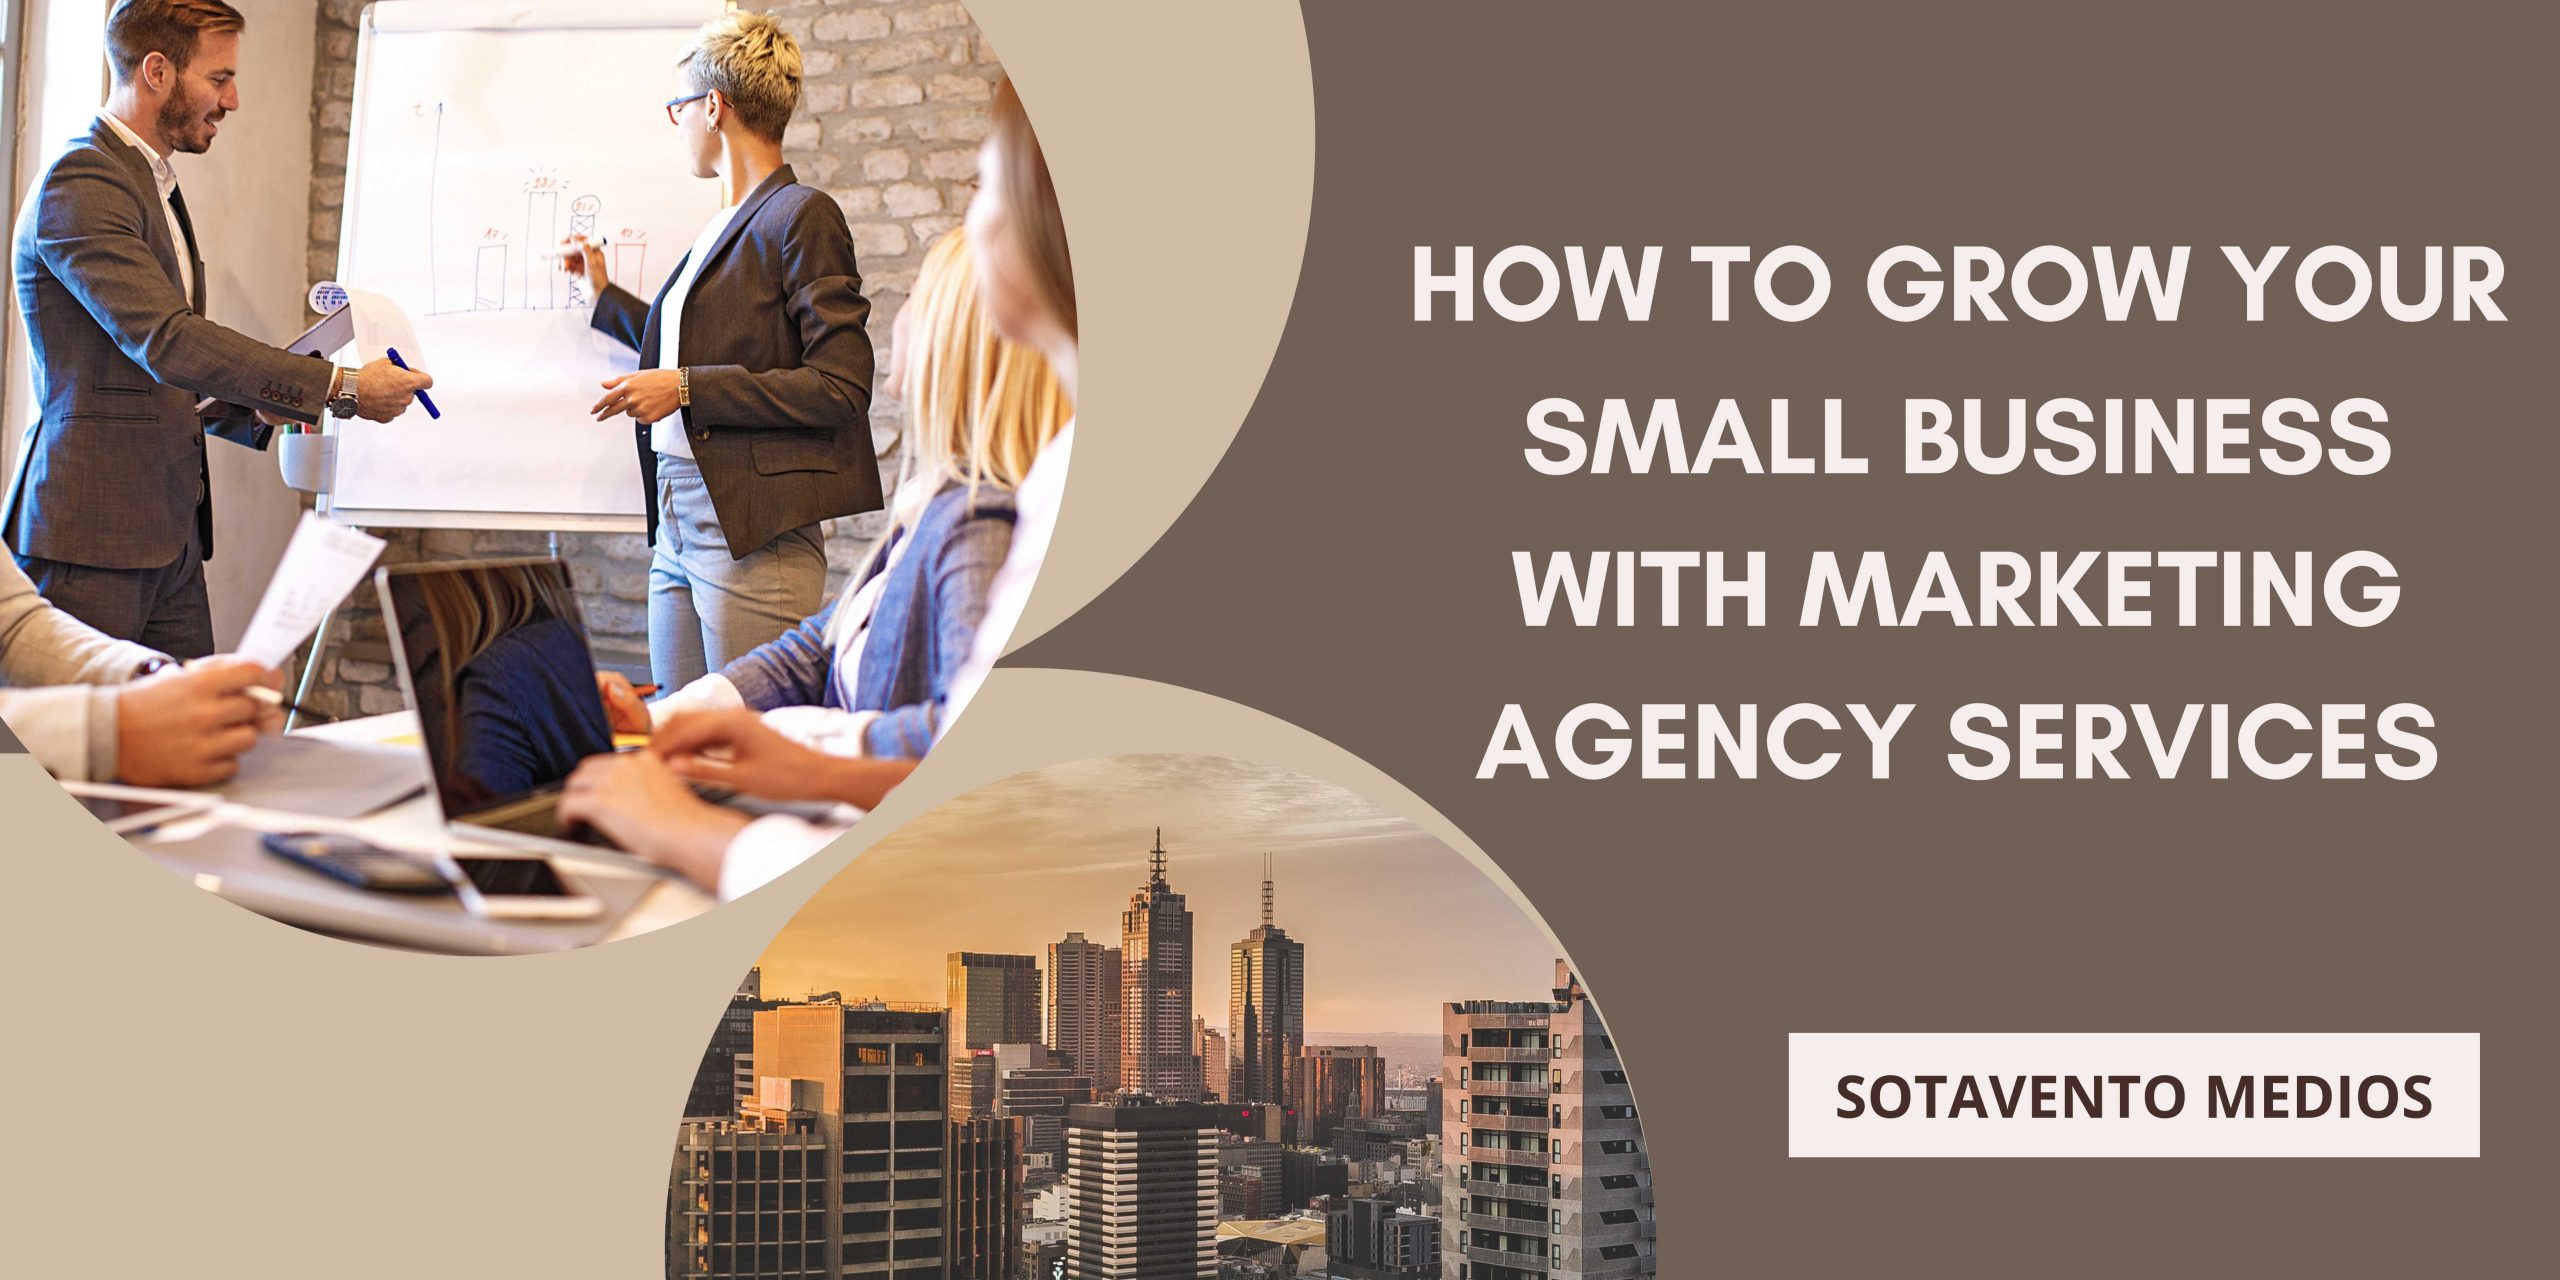 How to Grow Your Small Business with Marketing Agency Services